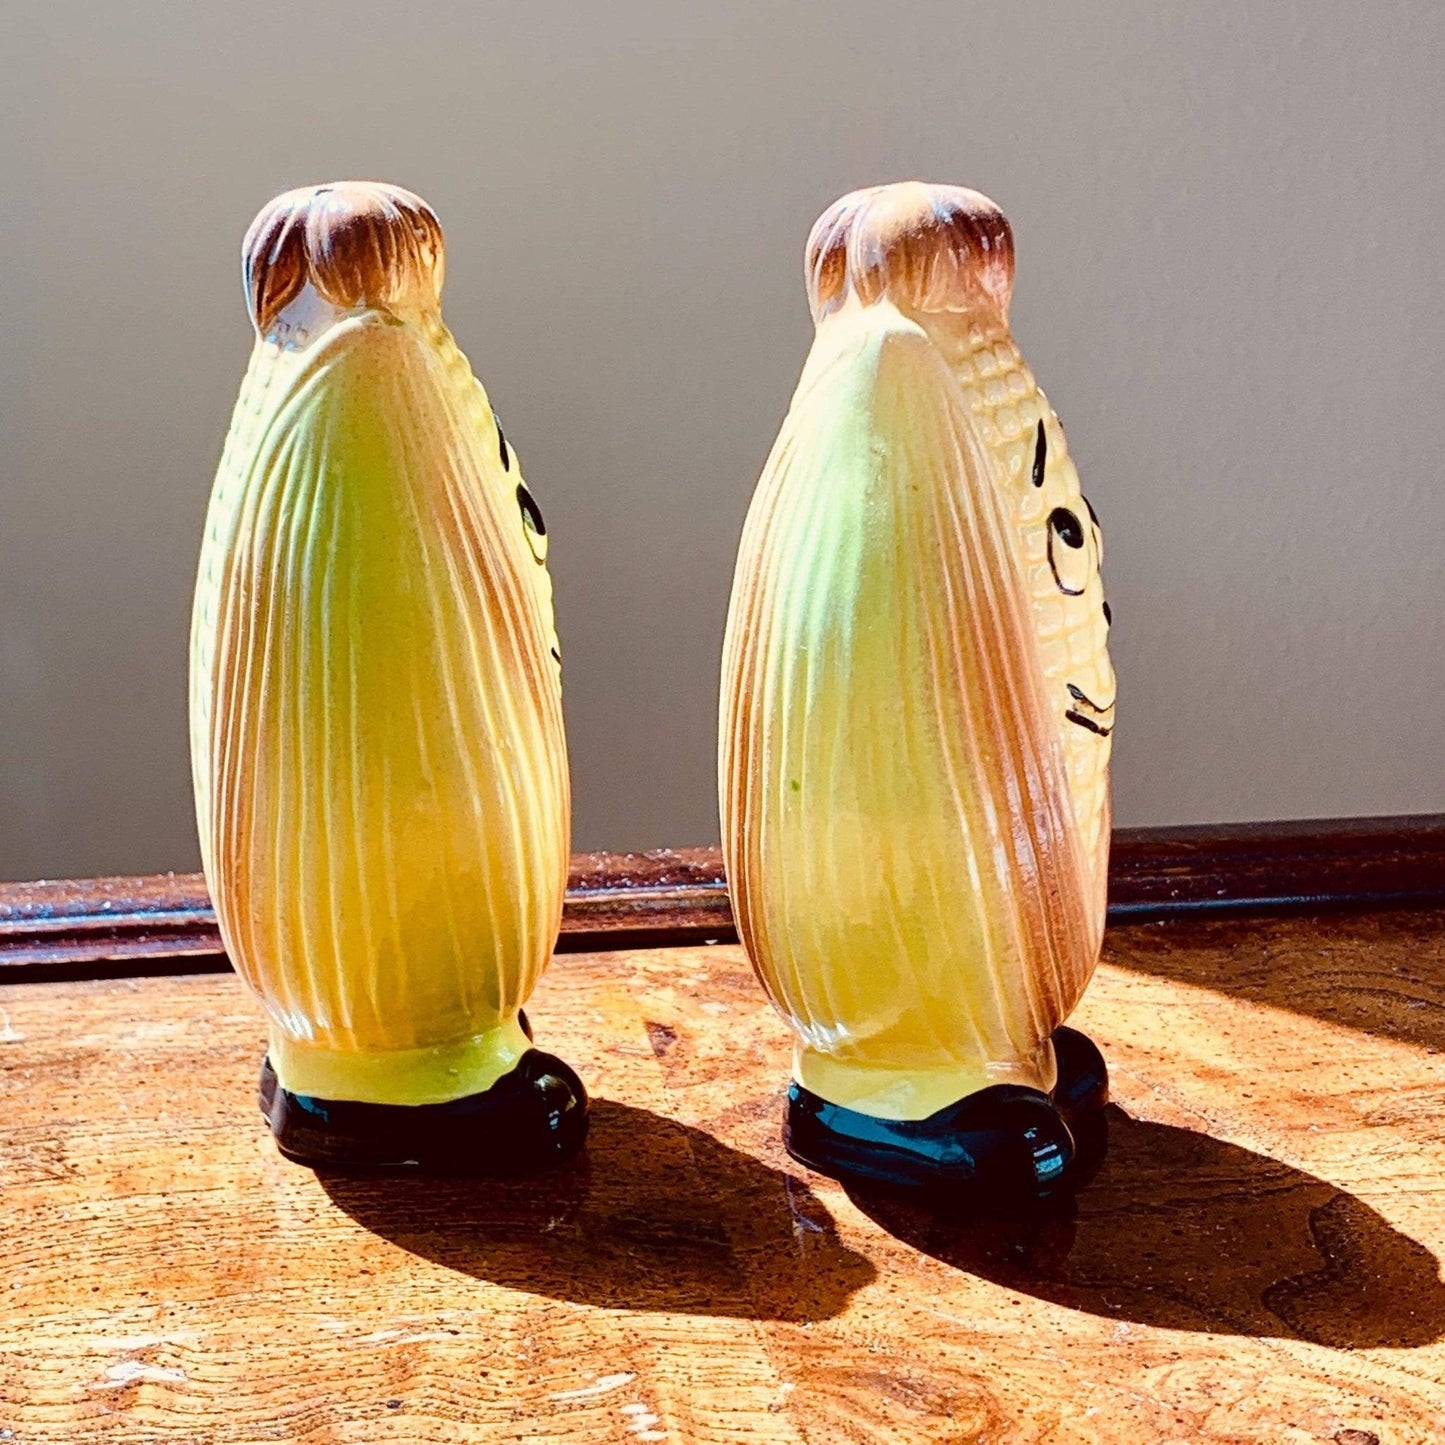 Vintage Ceramic Shakers Corn Cobs with Faces and Black Shoes